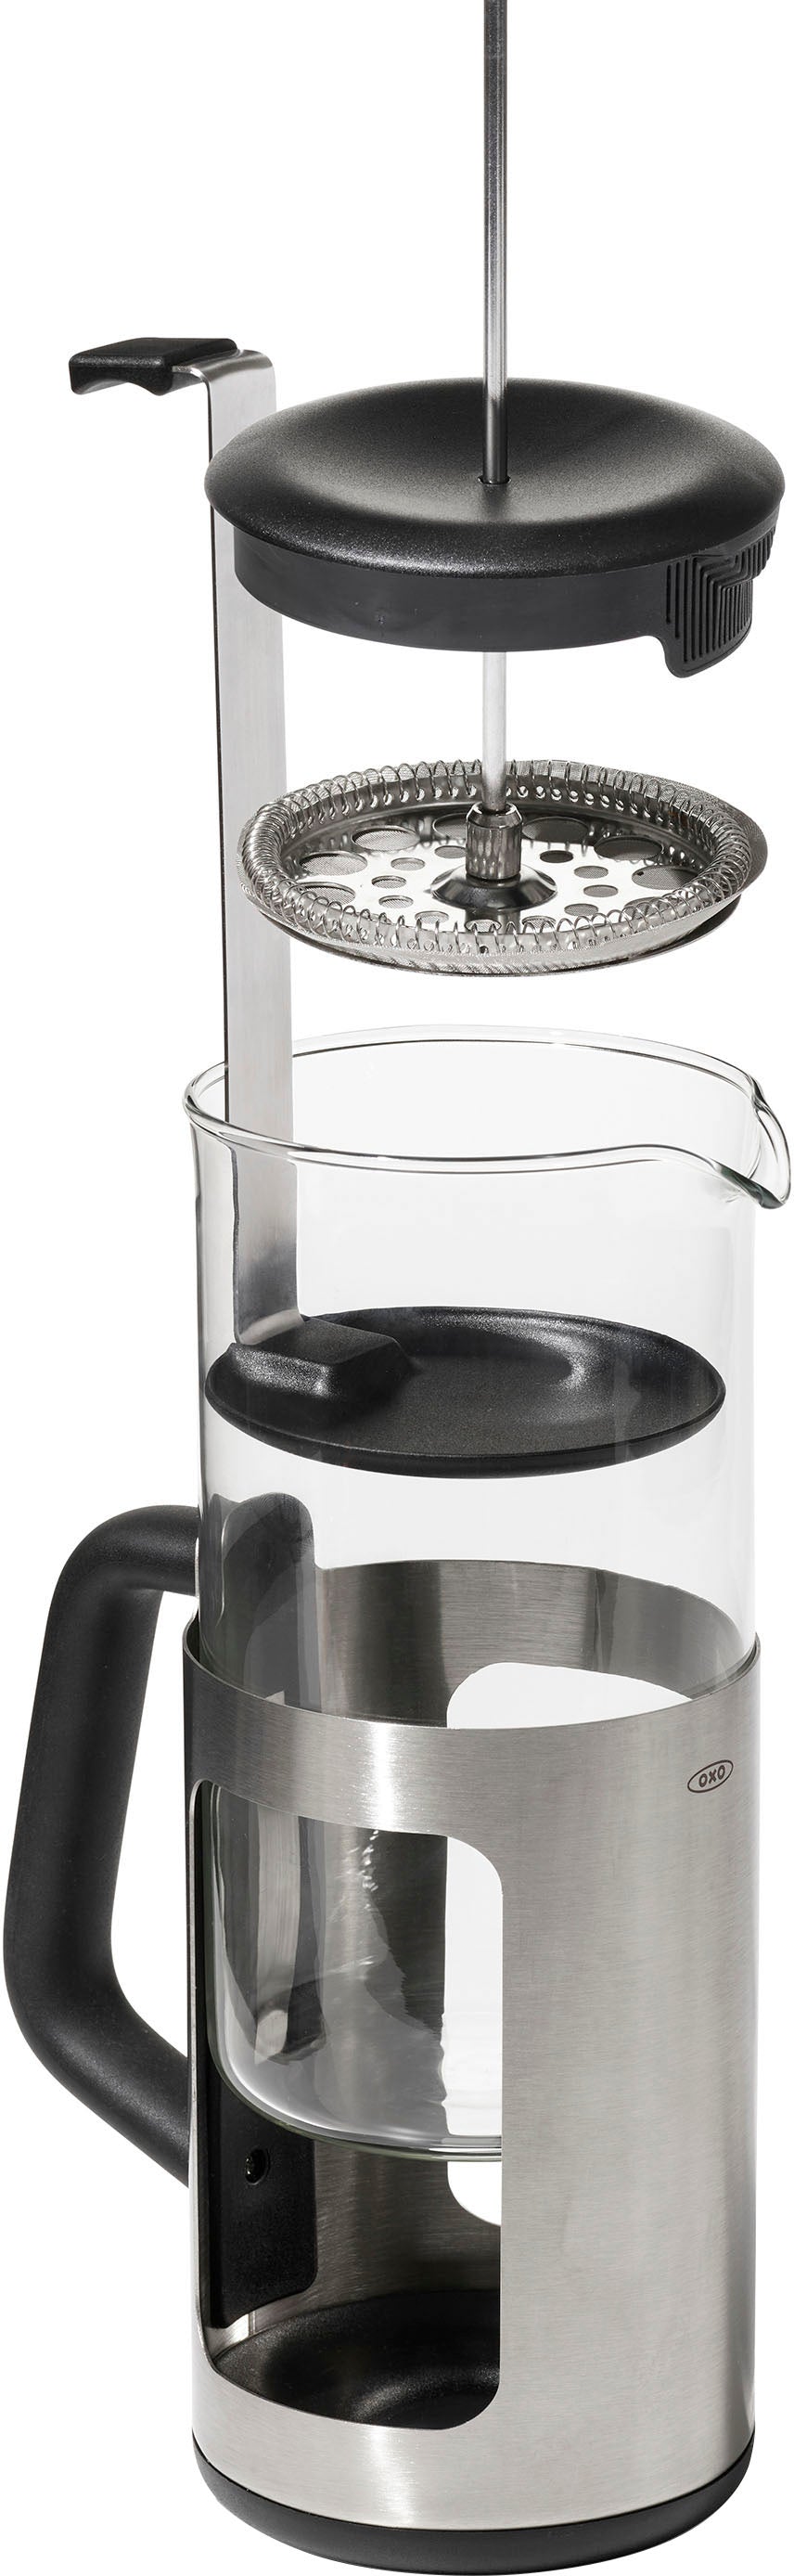 OXO - Brew French Press 8 Cup Coffee Maker with GroundsLifter - Black_7